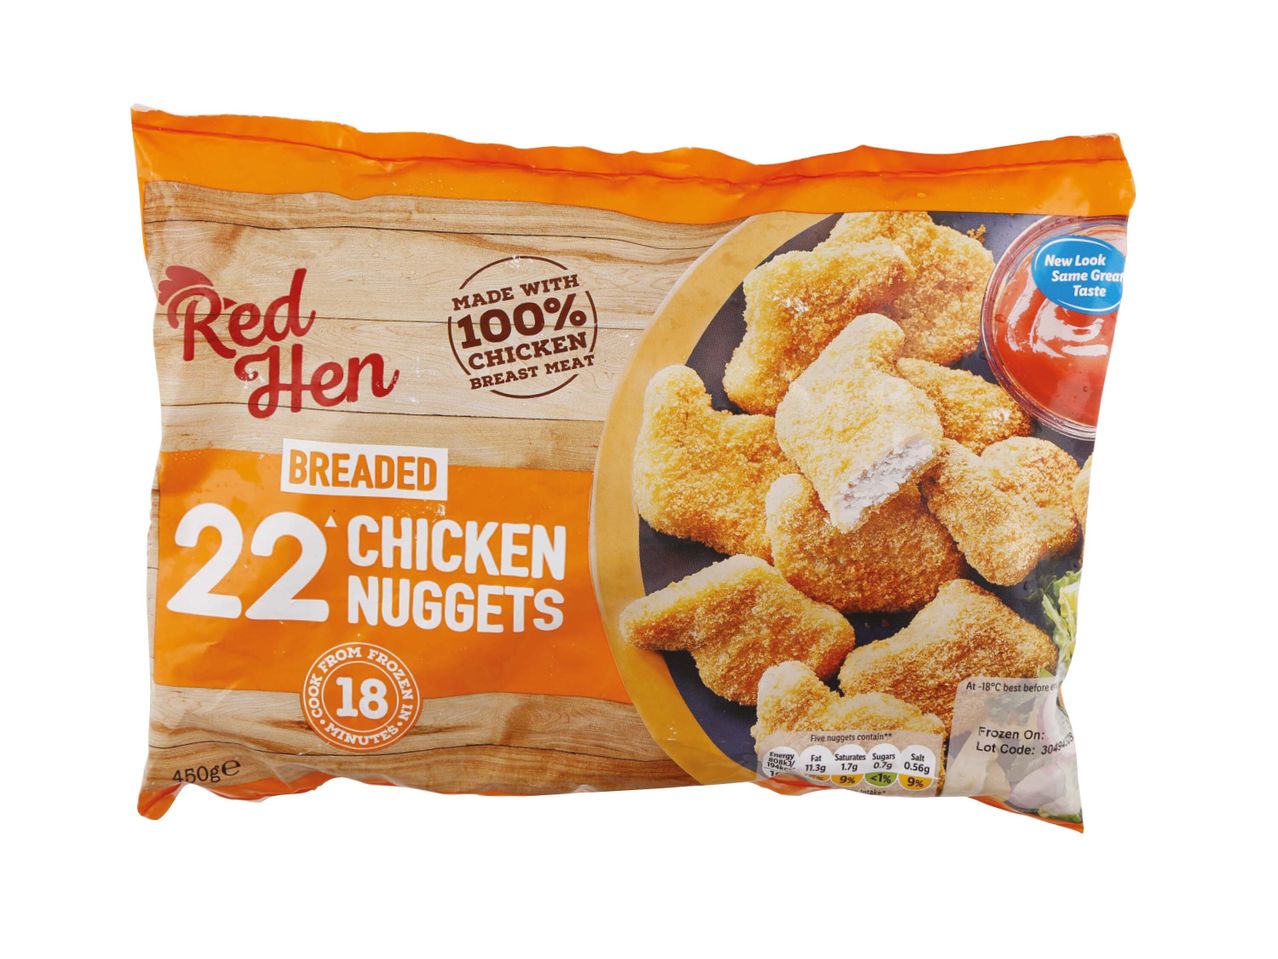 Go to full screen view: Chicken Nuggets - Image 1